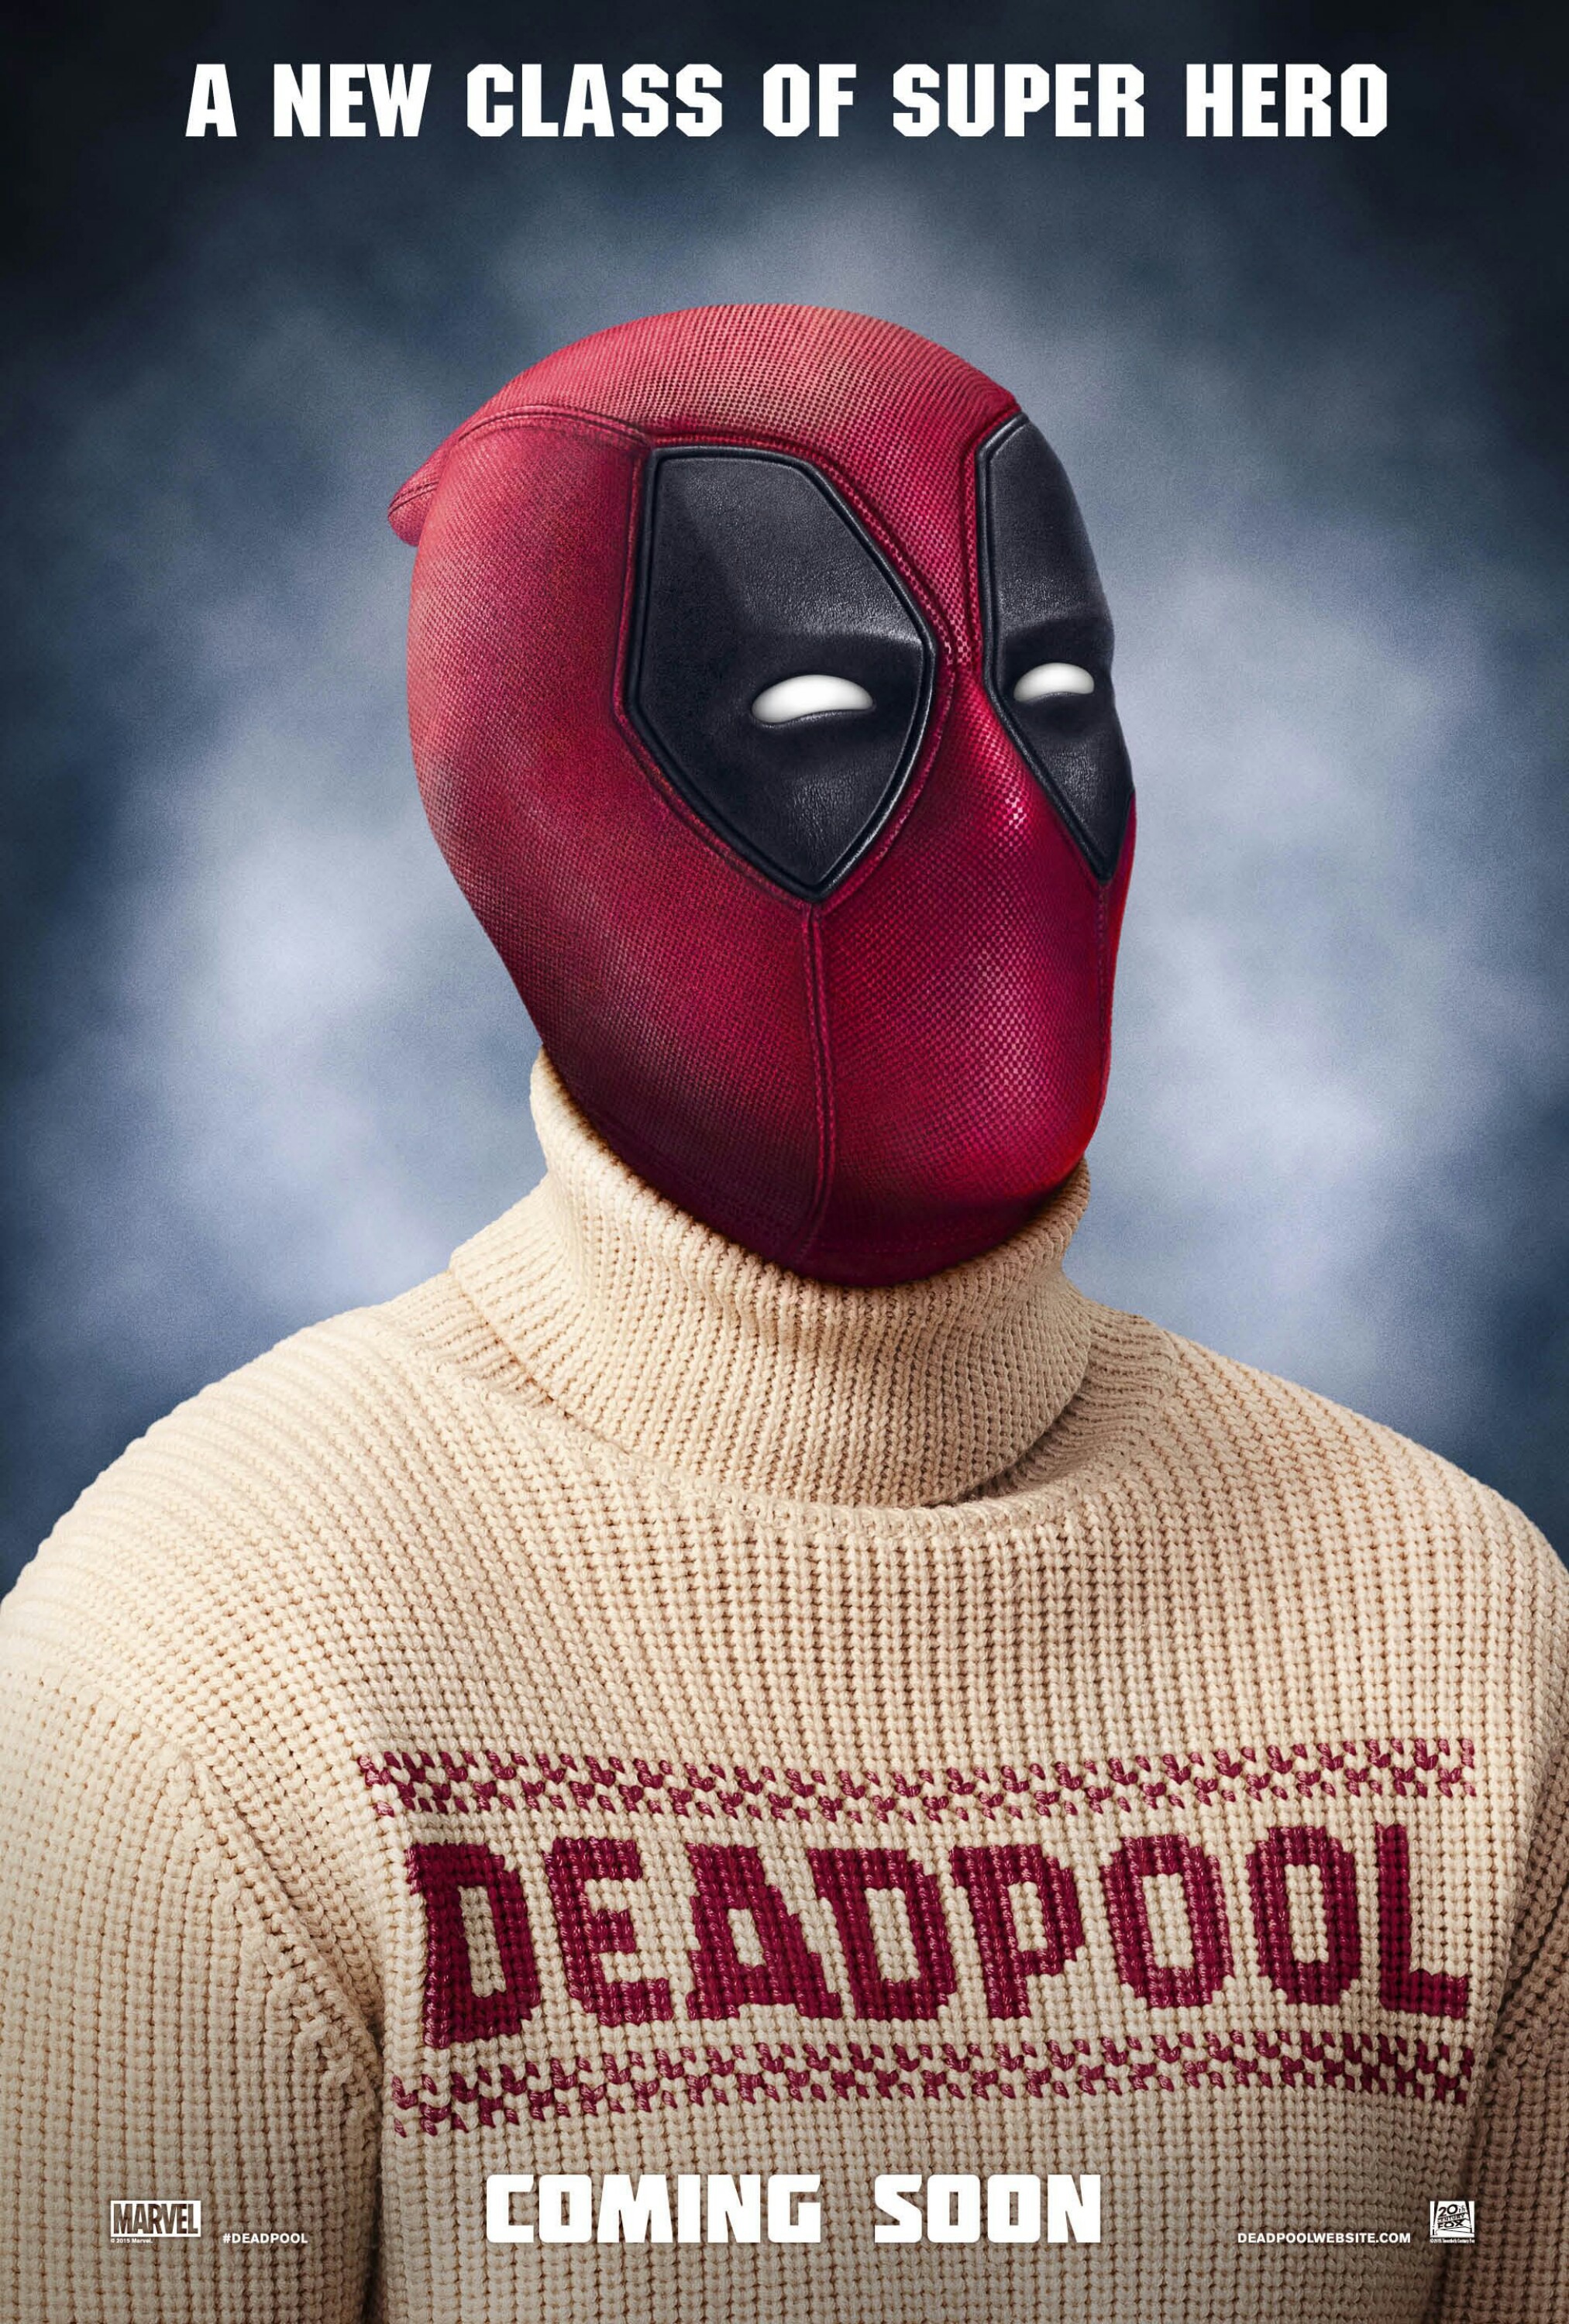 Mega Sized Movie Poster Image for Deadpool (#5 of 15)